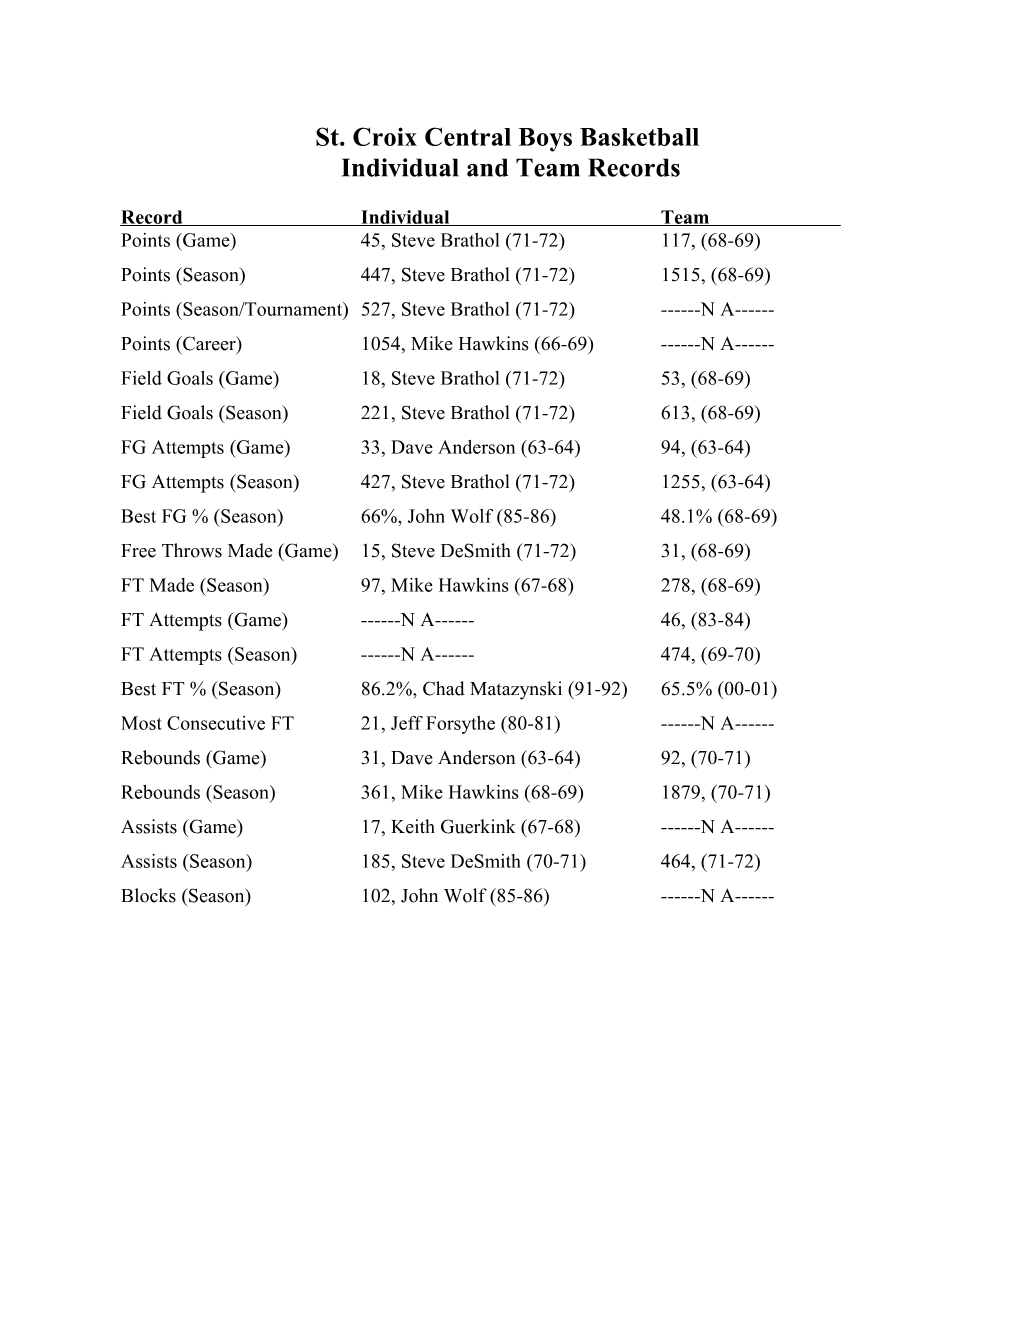 Individual and Team Records